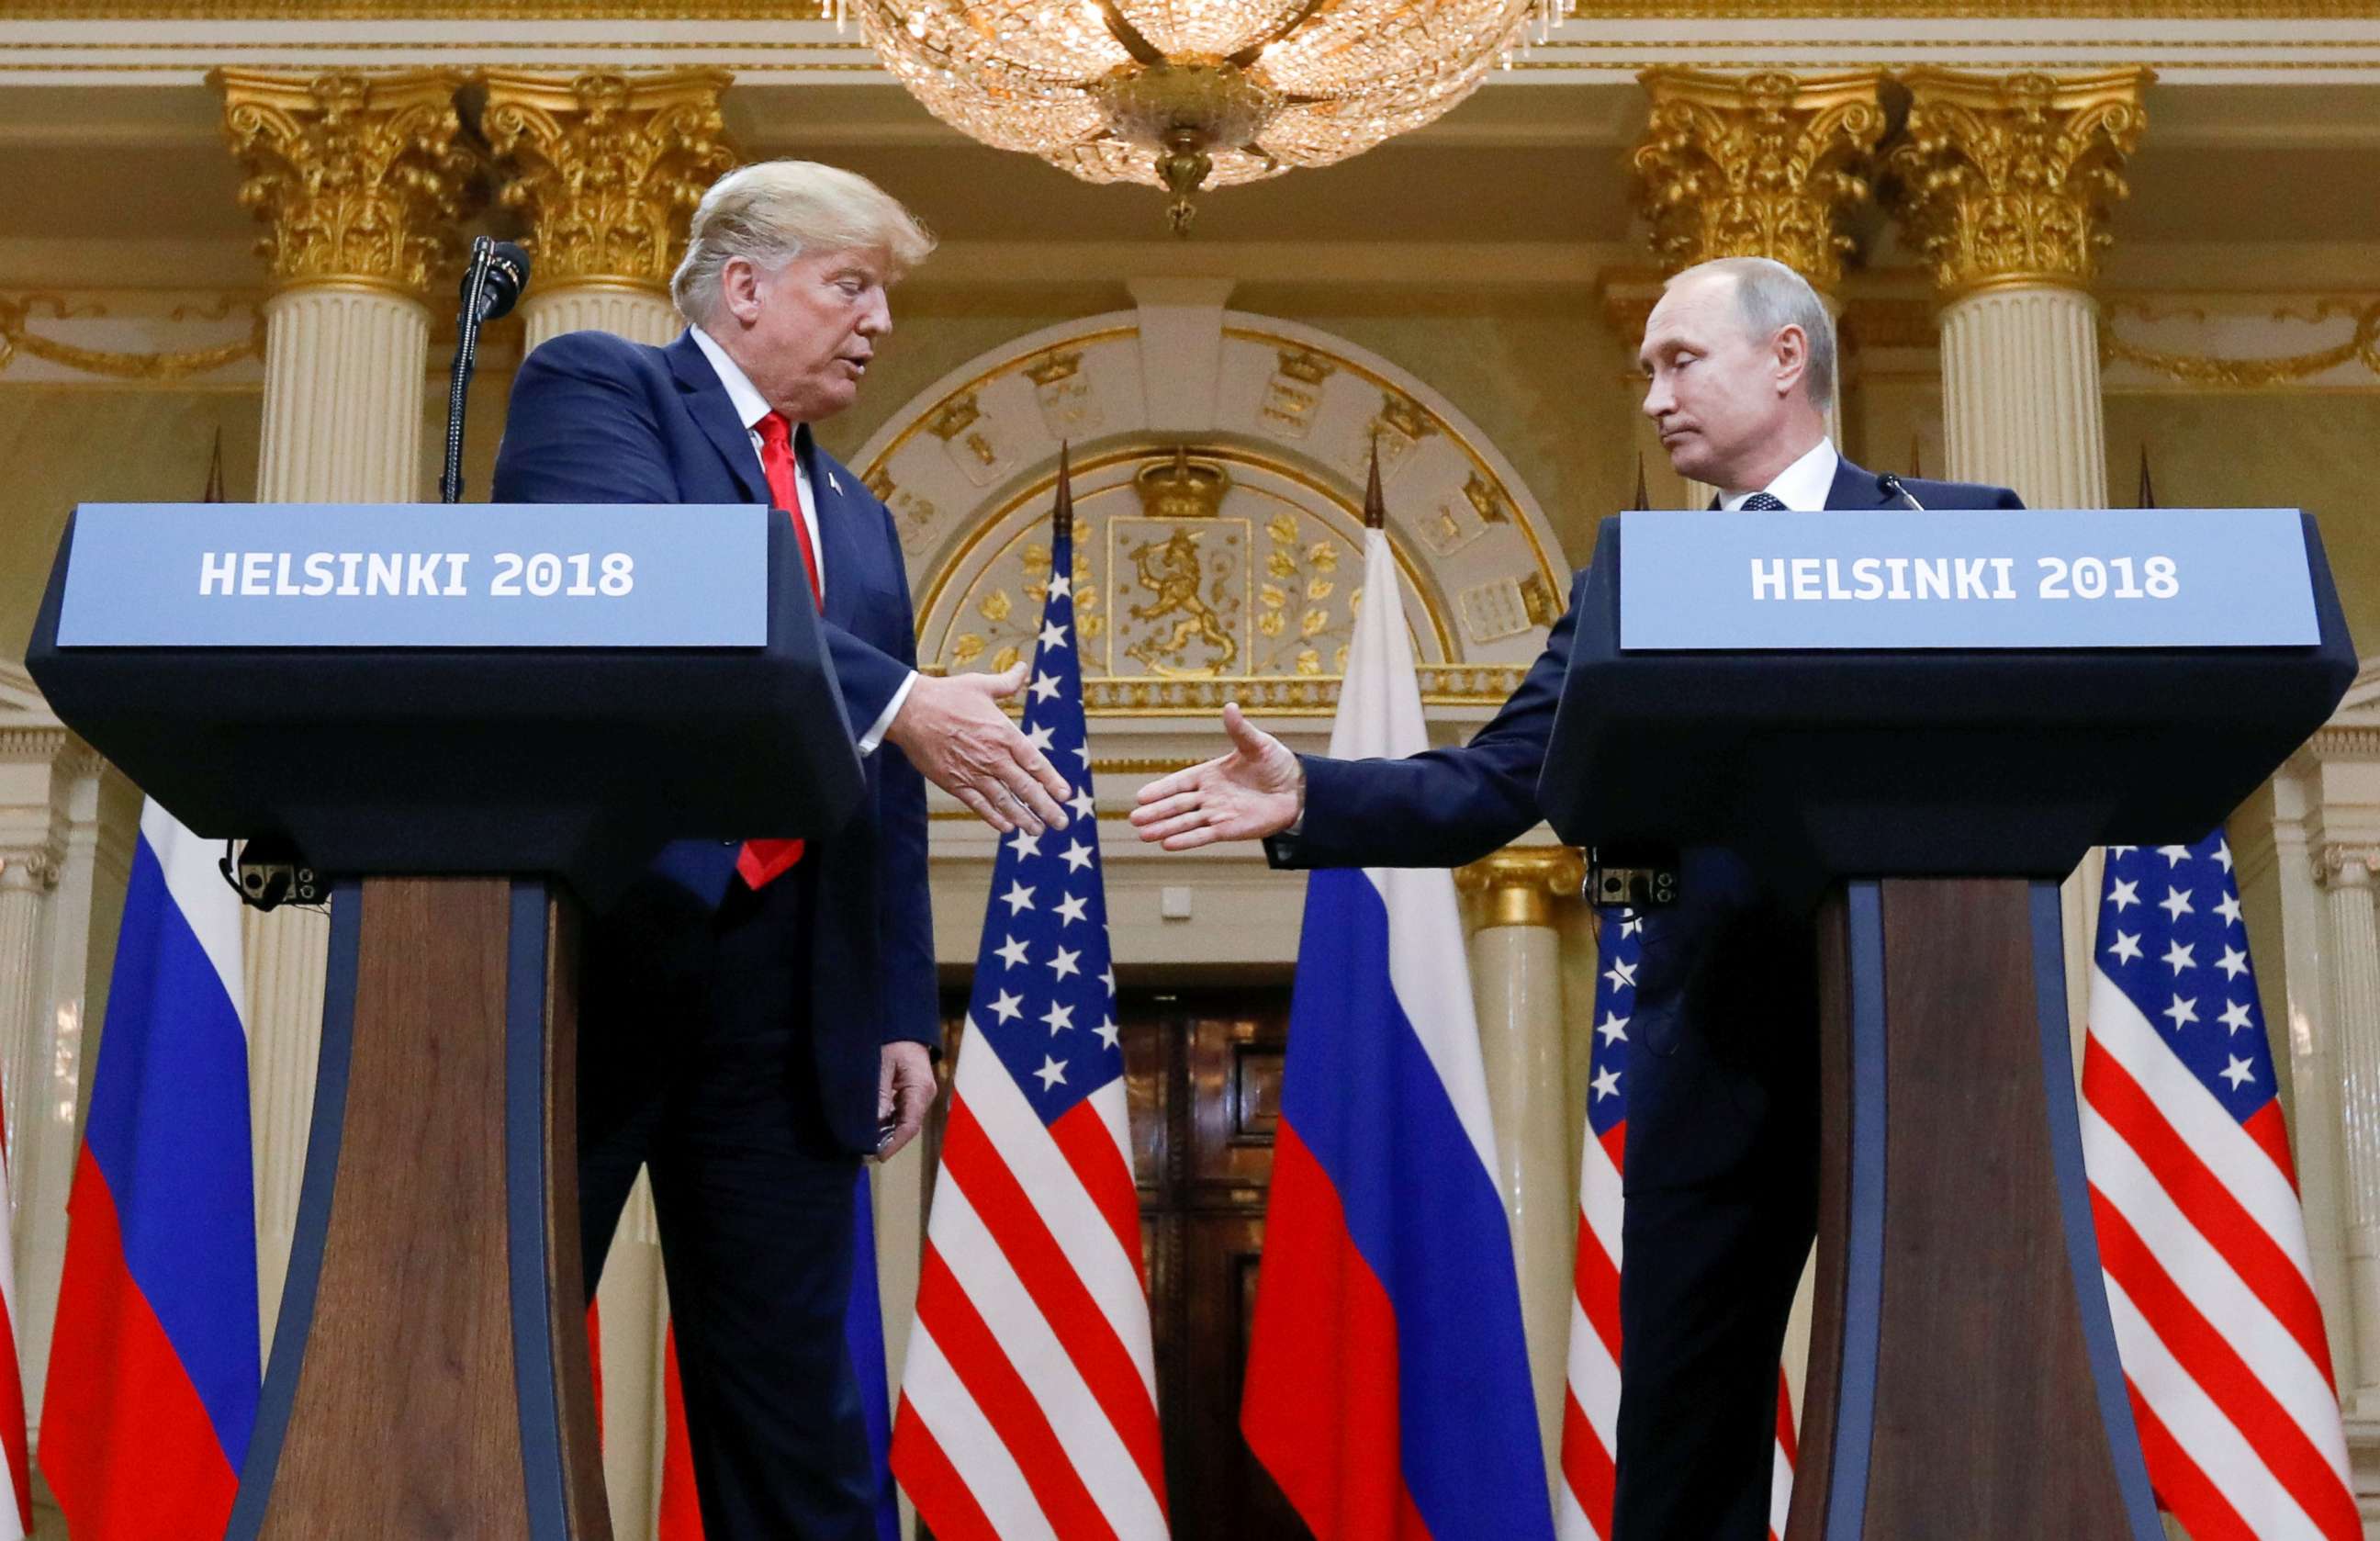 PHOTO: President Donald Trump and Russia's President Vladimir Putin shake hands during a joint news conference after their meeting in Helsinki, Finland, July 16, 2018.